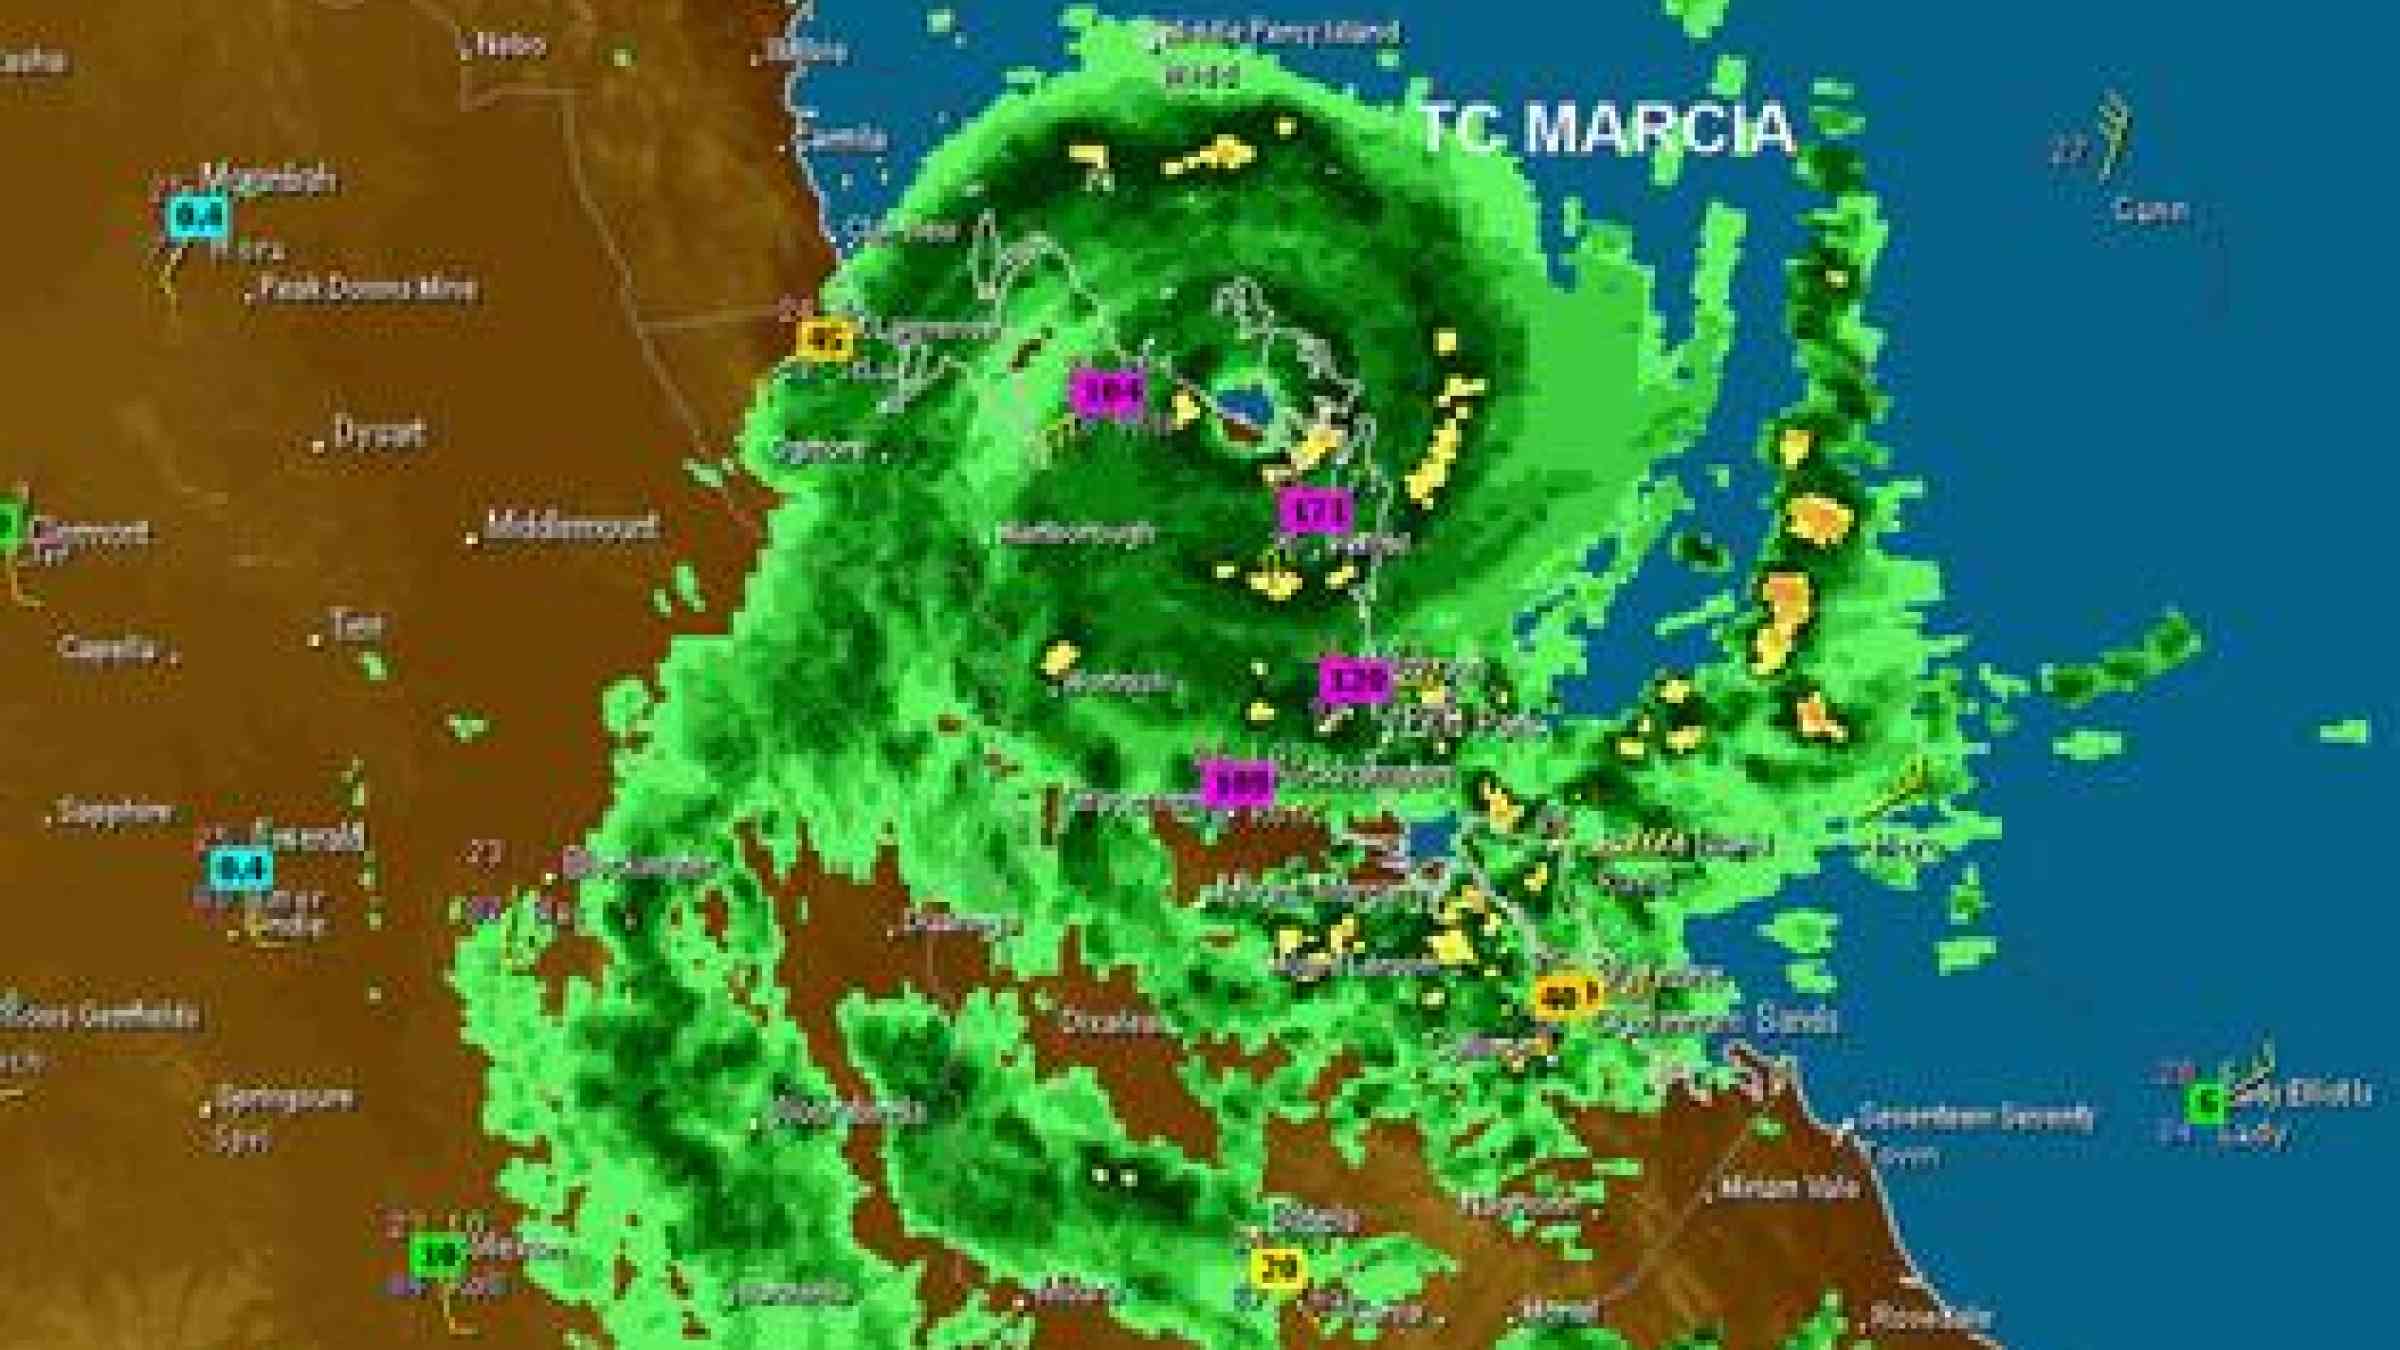 Tropical Cyclone Marcia continues to unleash heavy rains and strong winds in Australia.